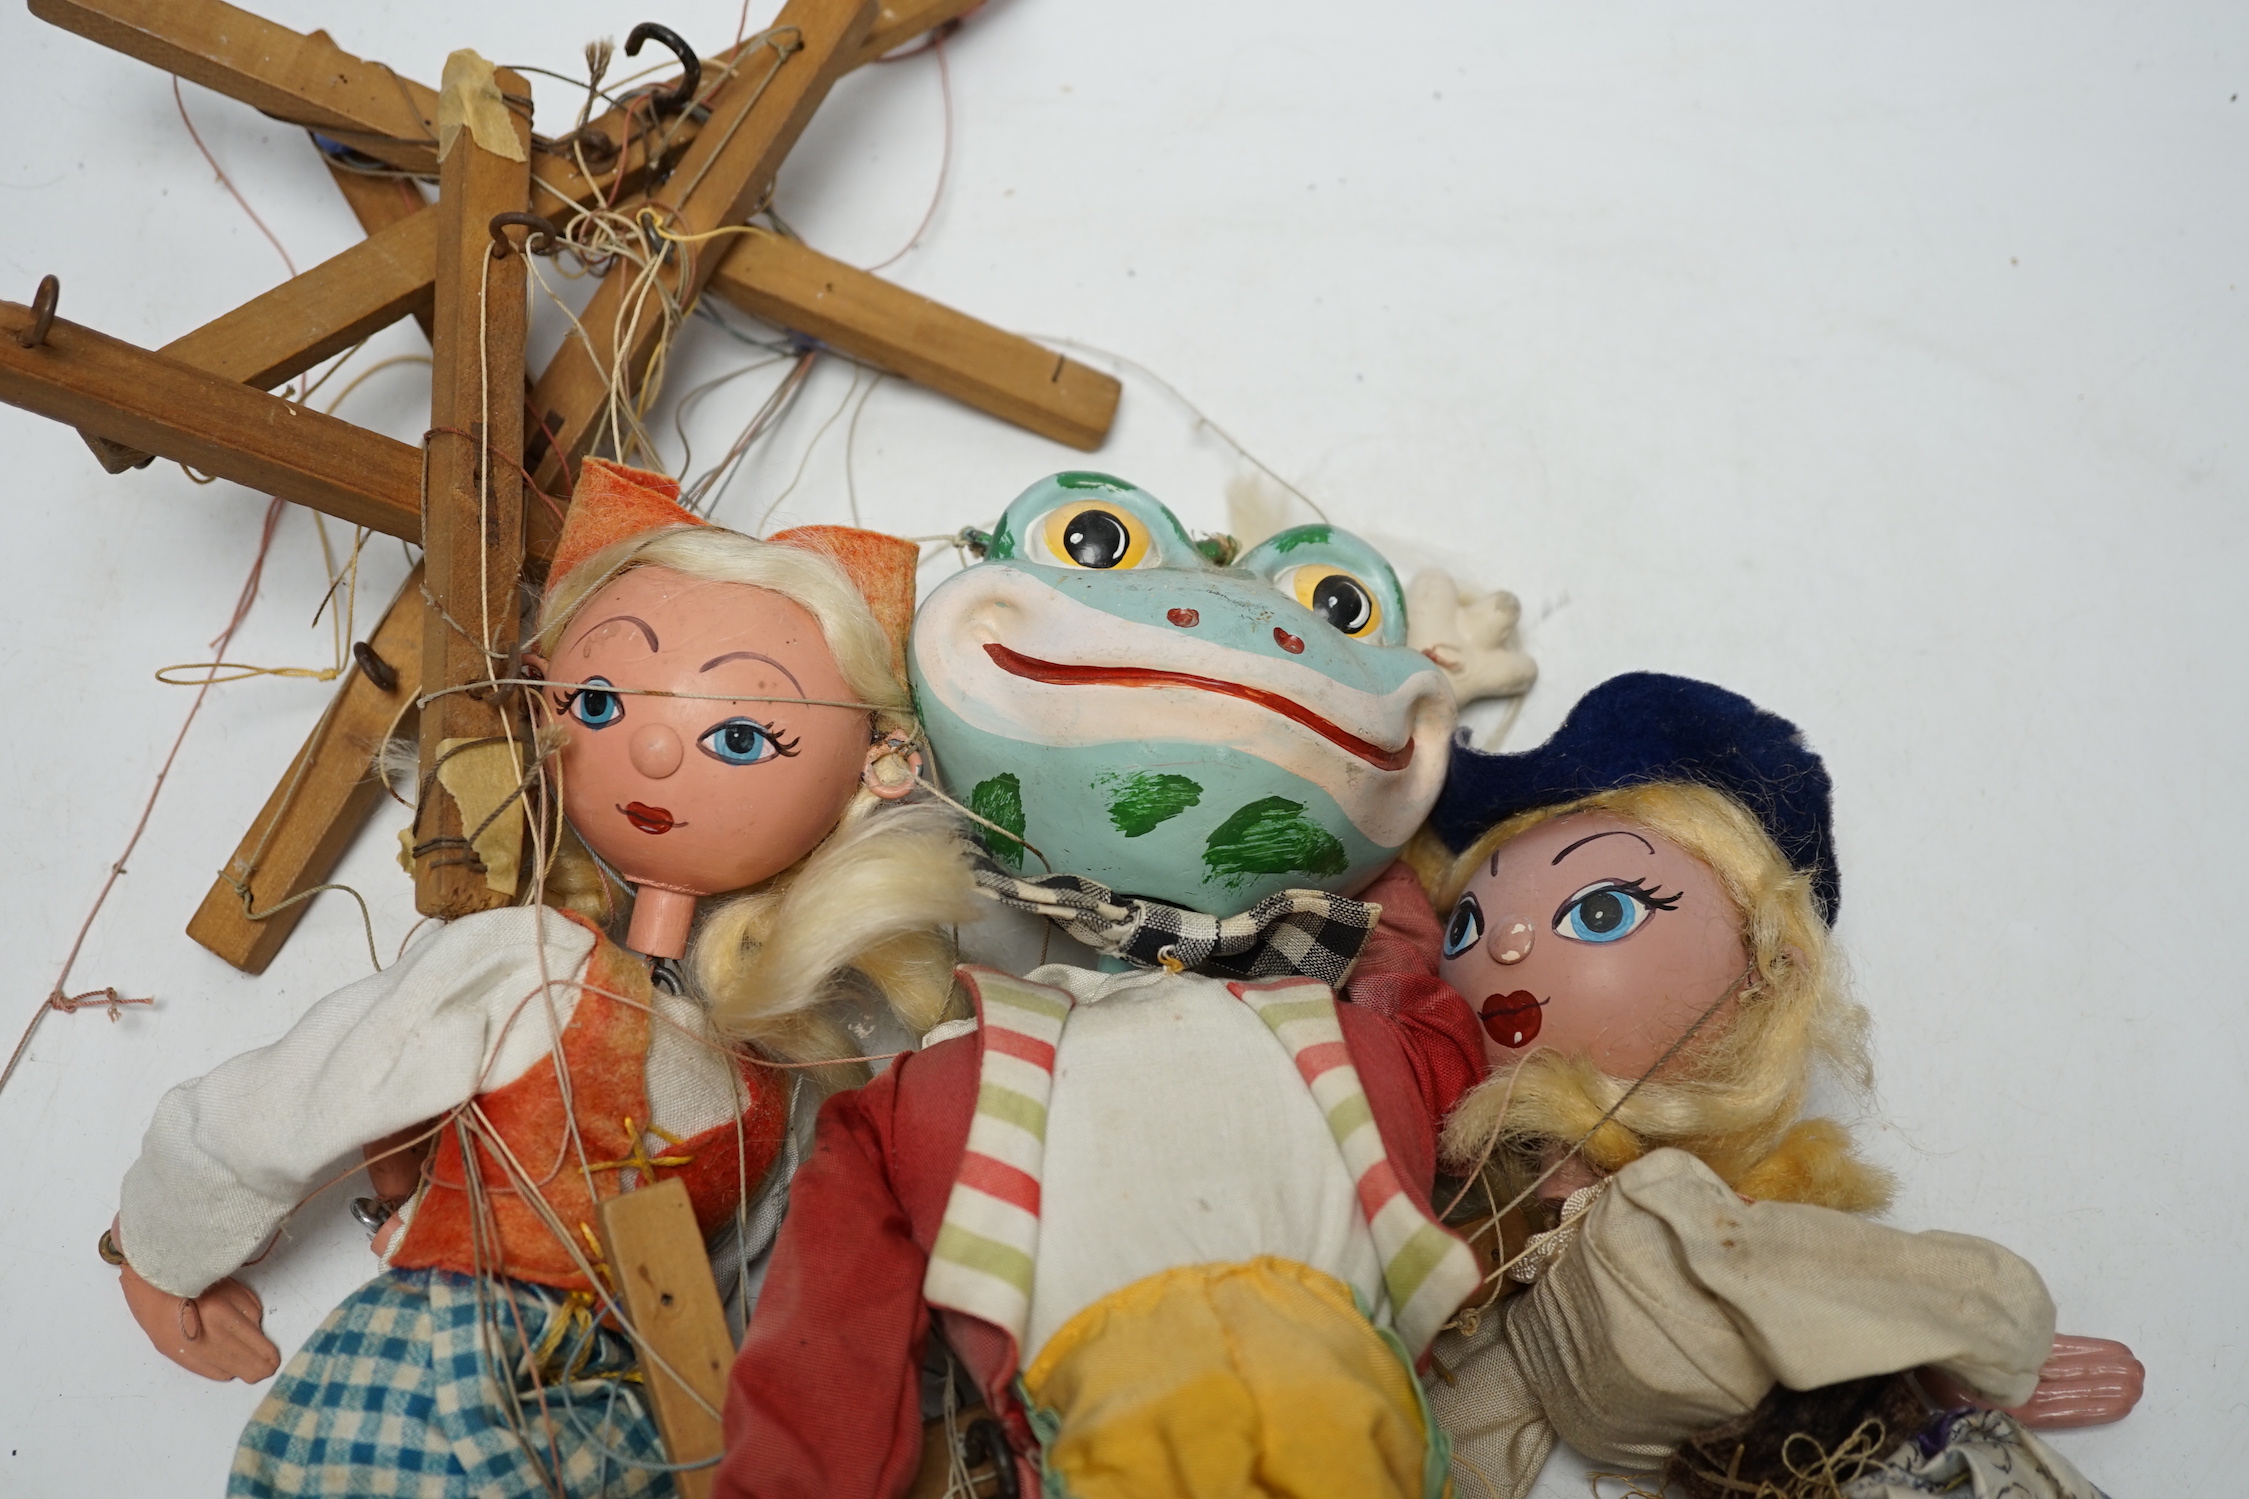 Five Pelham puppets, one boxed